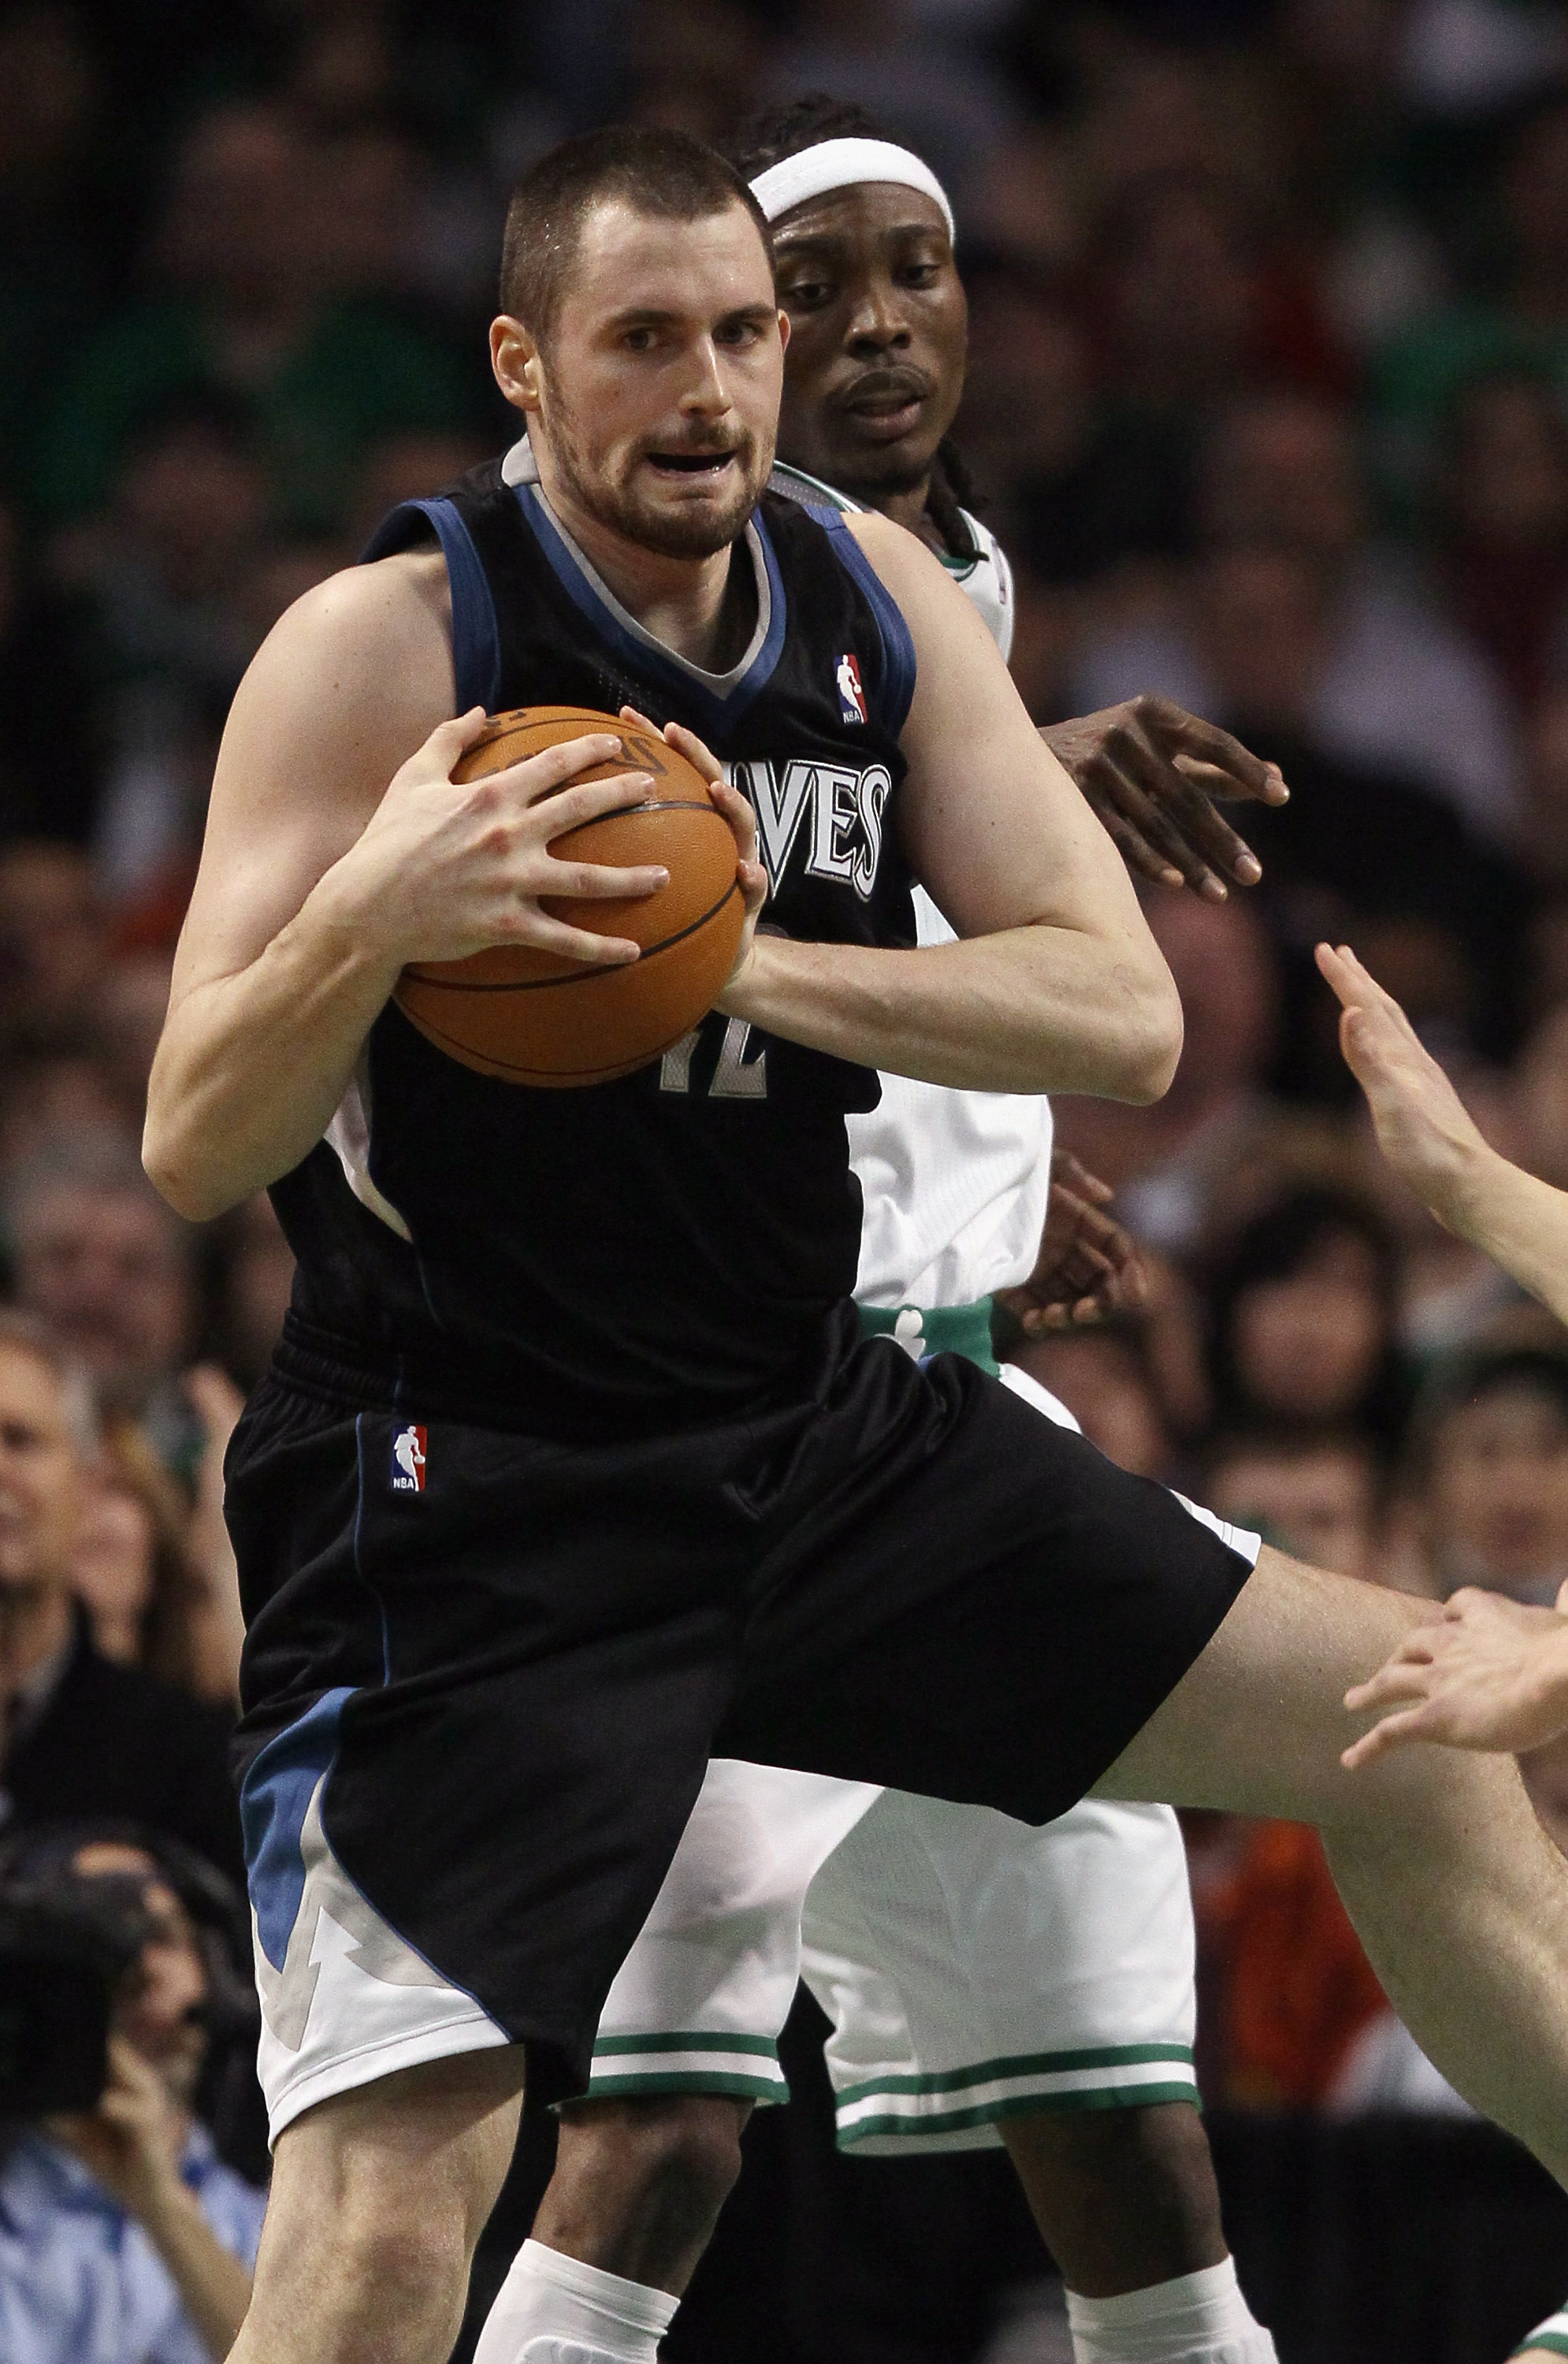 BOSTON, MA - JANUARY 03:  Kevin Love #42 of the Minnesota Timberwolves grabs the rebound before Marquis Daniels #8 of the Boston Celtics on January 3, 2011 at the TD Garden in Boston, Massachusetts. NOTE TO USER: User expressly acknowledges and agrees tha